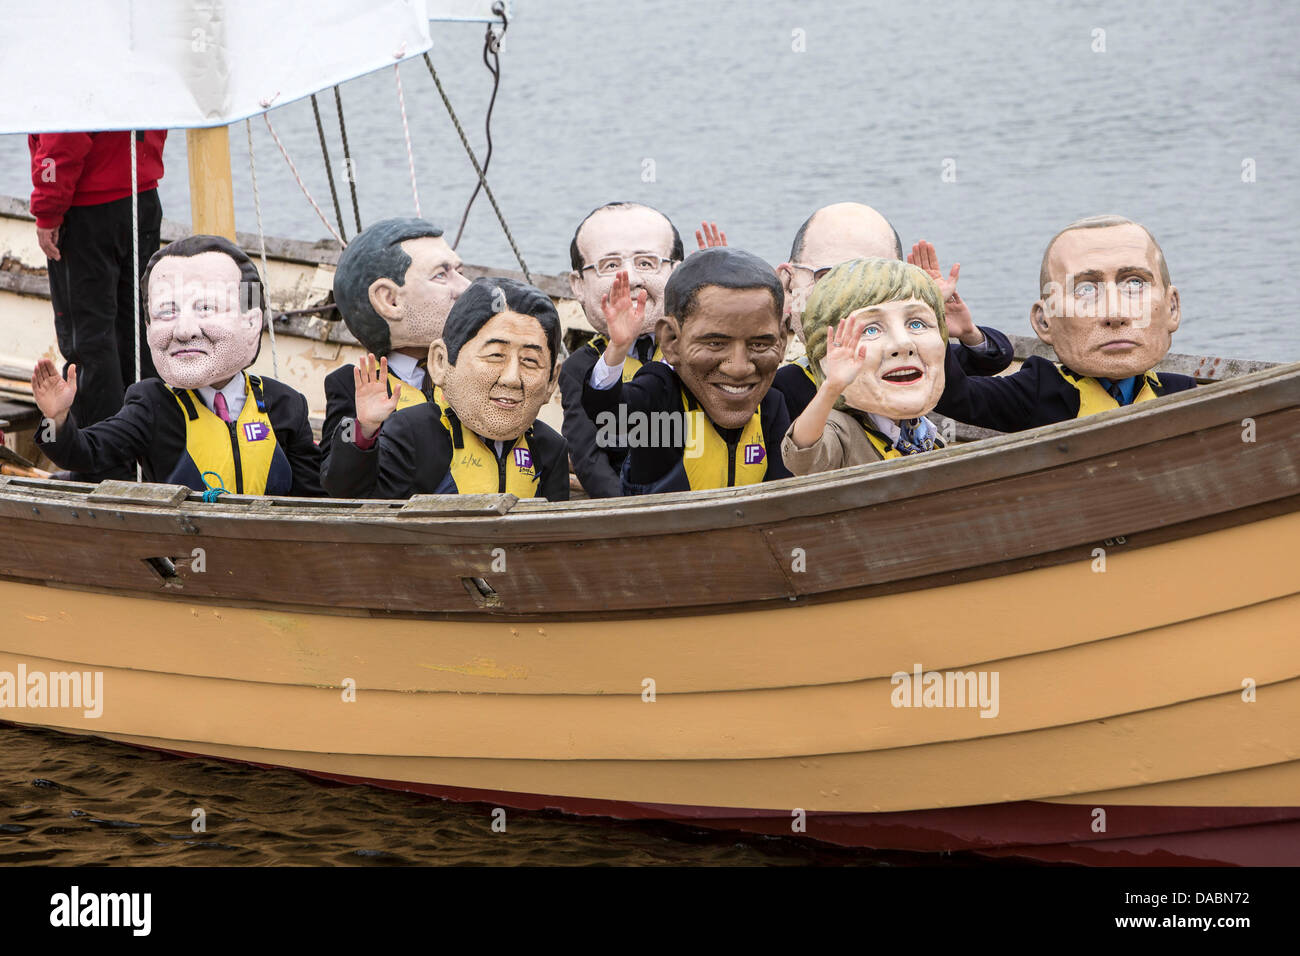 IF campaign viking ships with World leaders in masks calls on the G8 to end tax dodging so people can feed themselves in future. Stock Photo